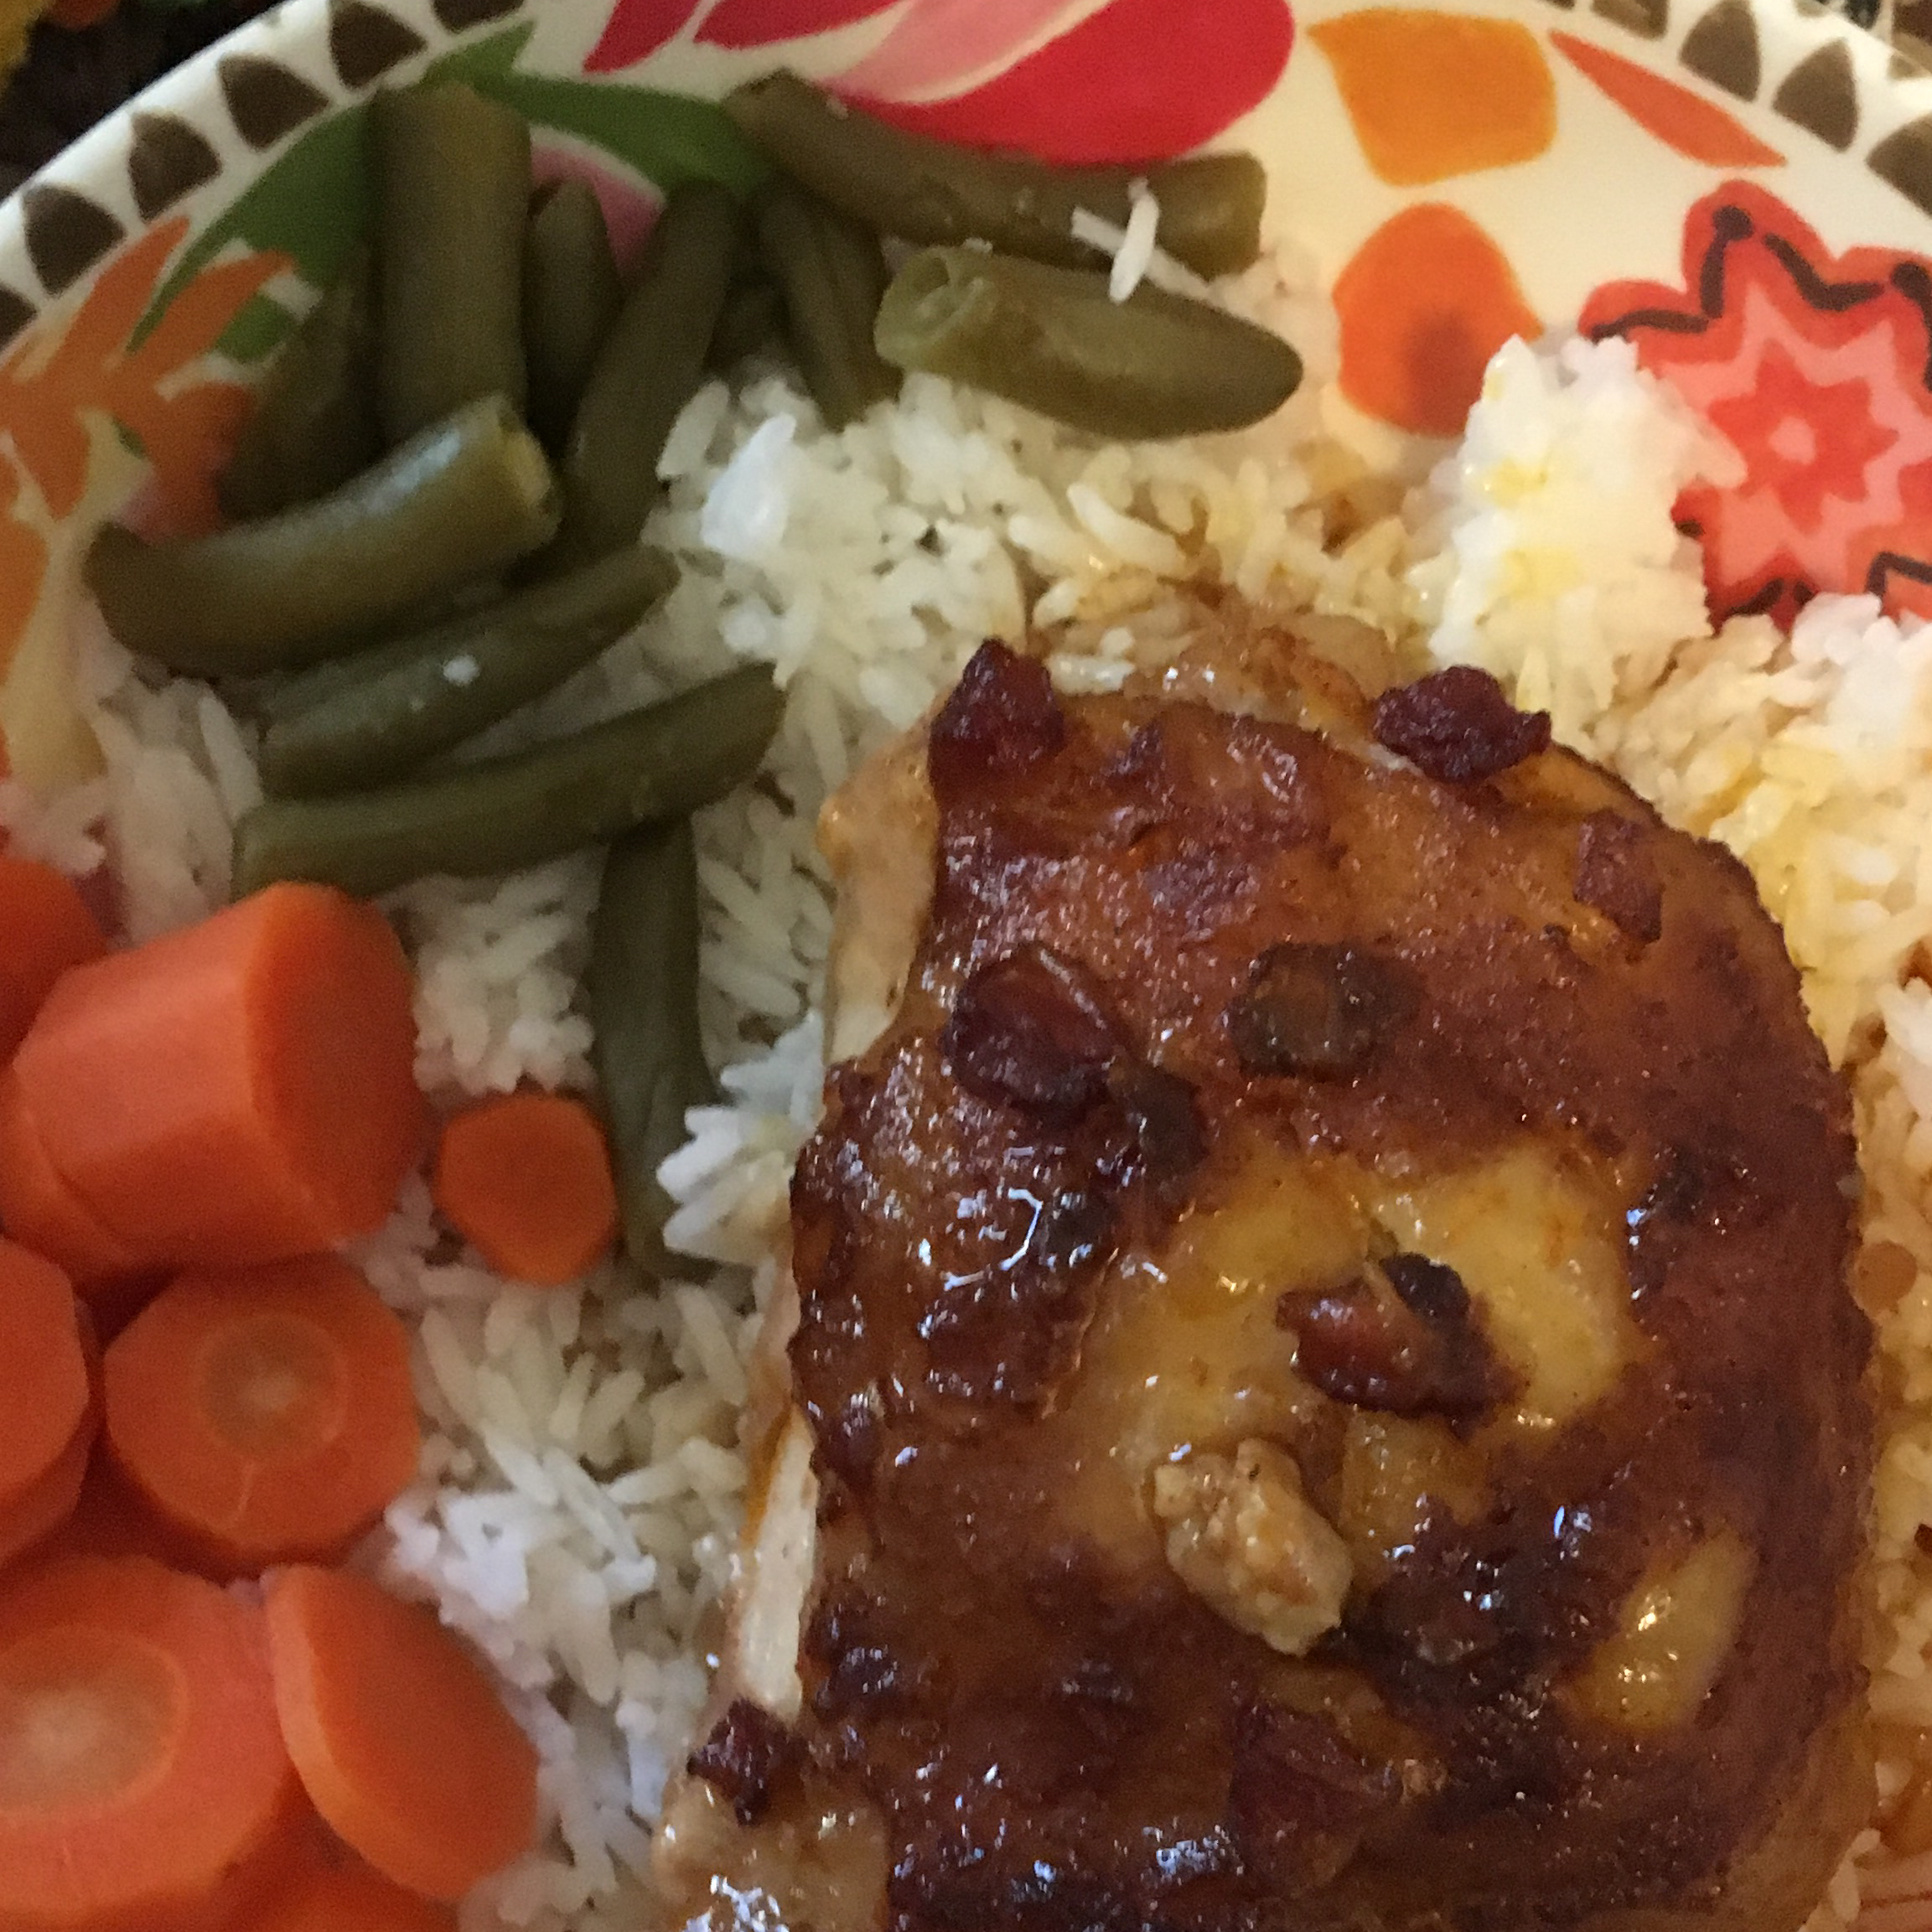 Yummy Baked Chicken Thighs in Tangy Sauce 